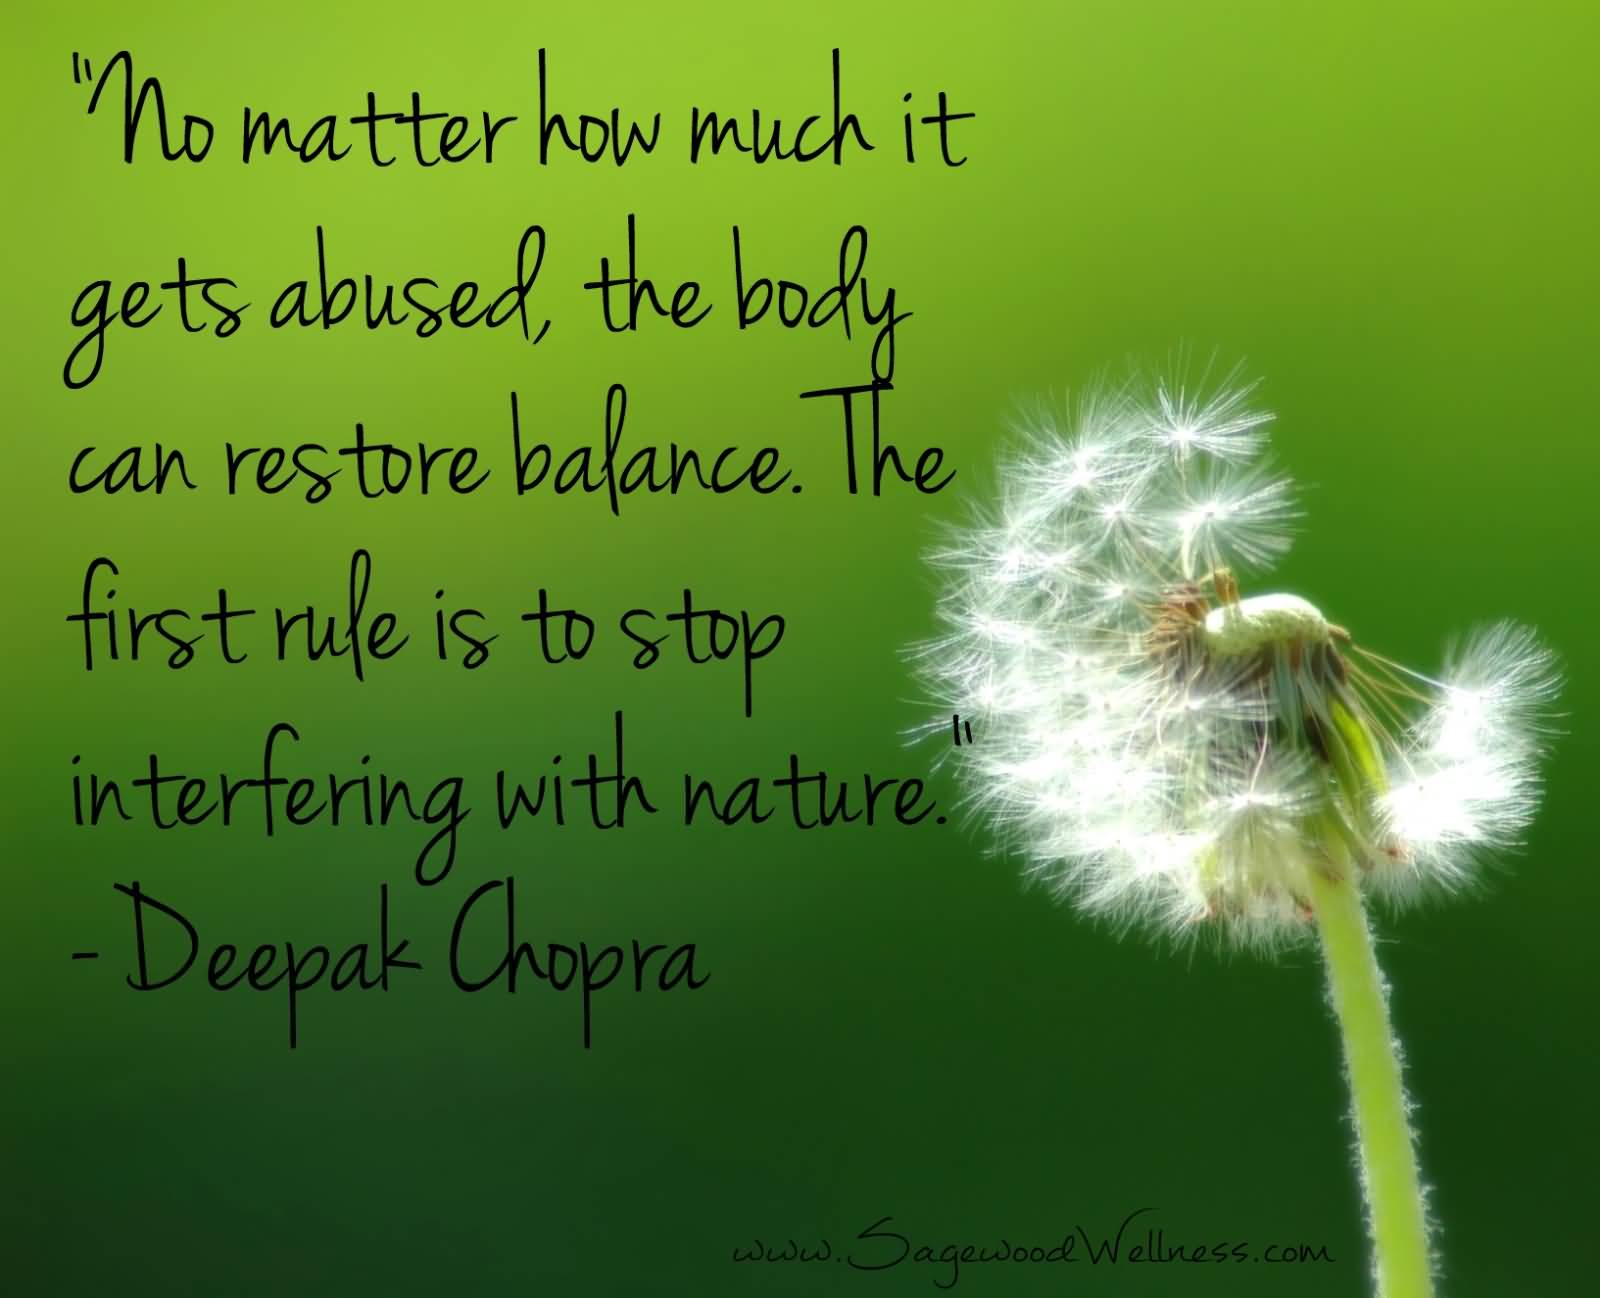 No matter how much it gets abused, the body can restore balance. The first rule is to stop interfering with nature. Deepark Chopra